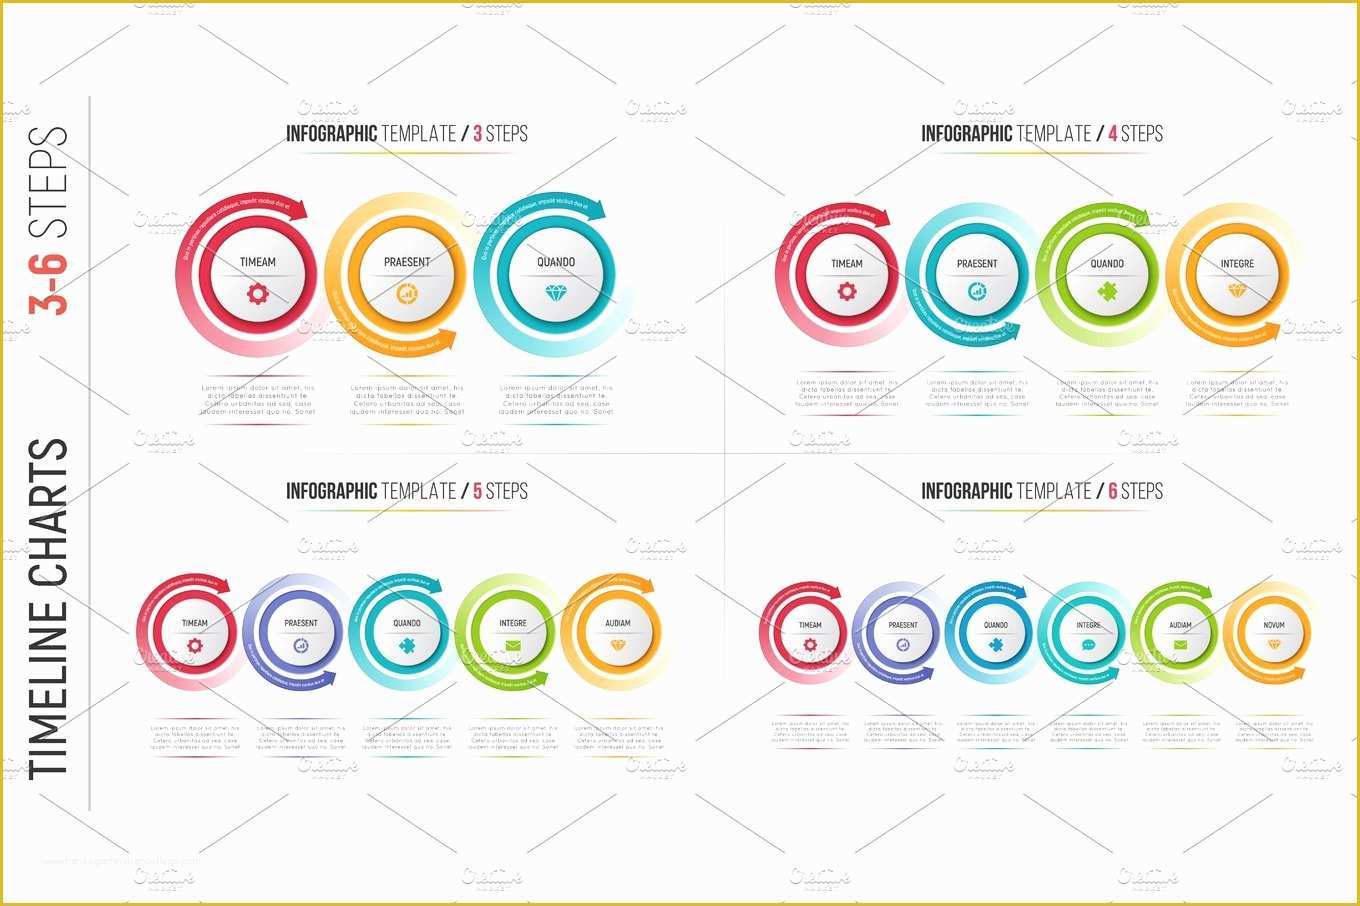 Free Joomla 3.6 Templates Of Infographic 3 6 Steps Process Charts with Circular Arrows